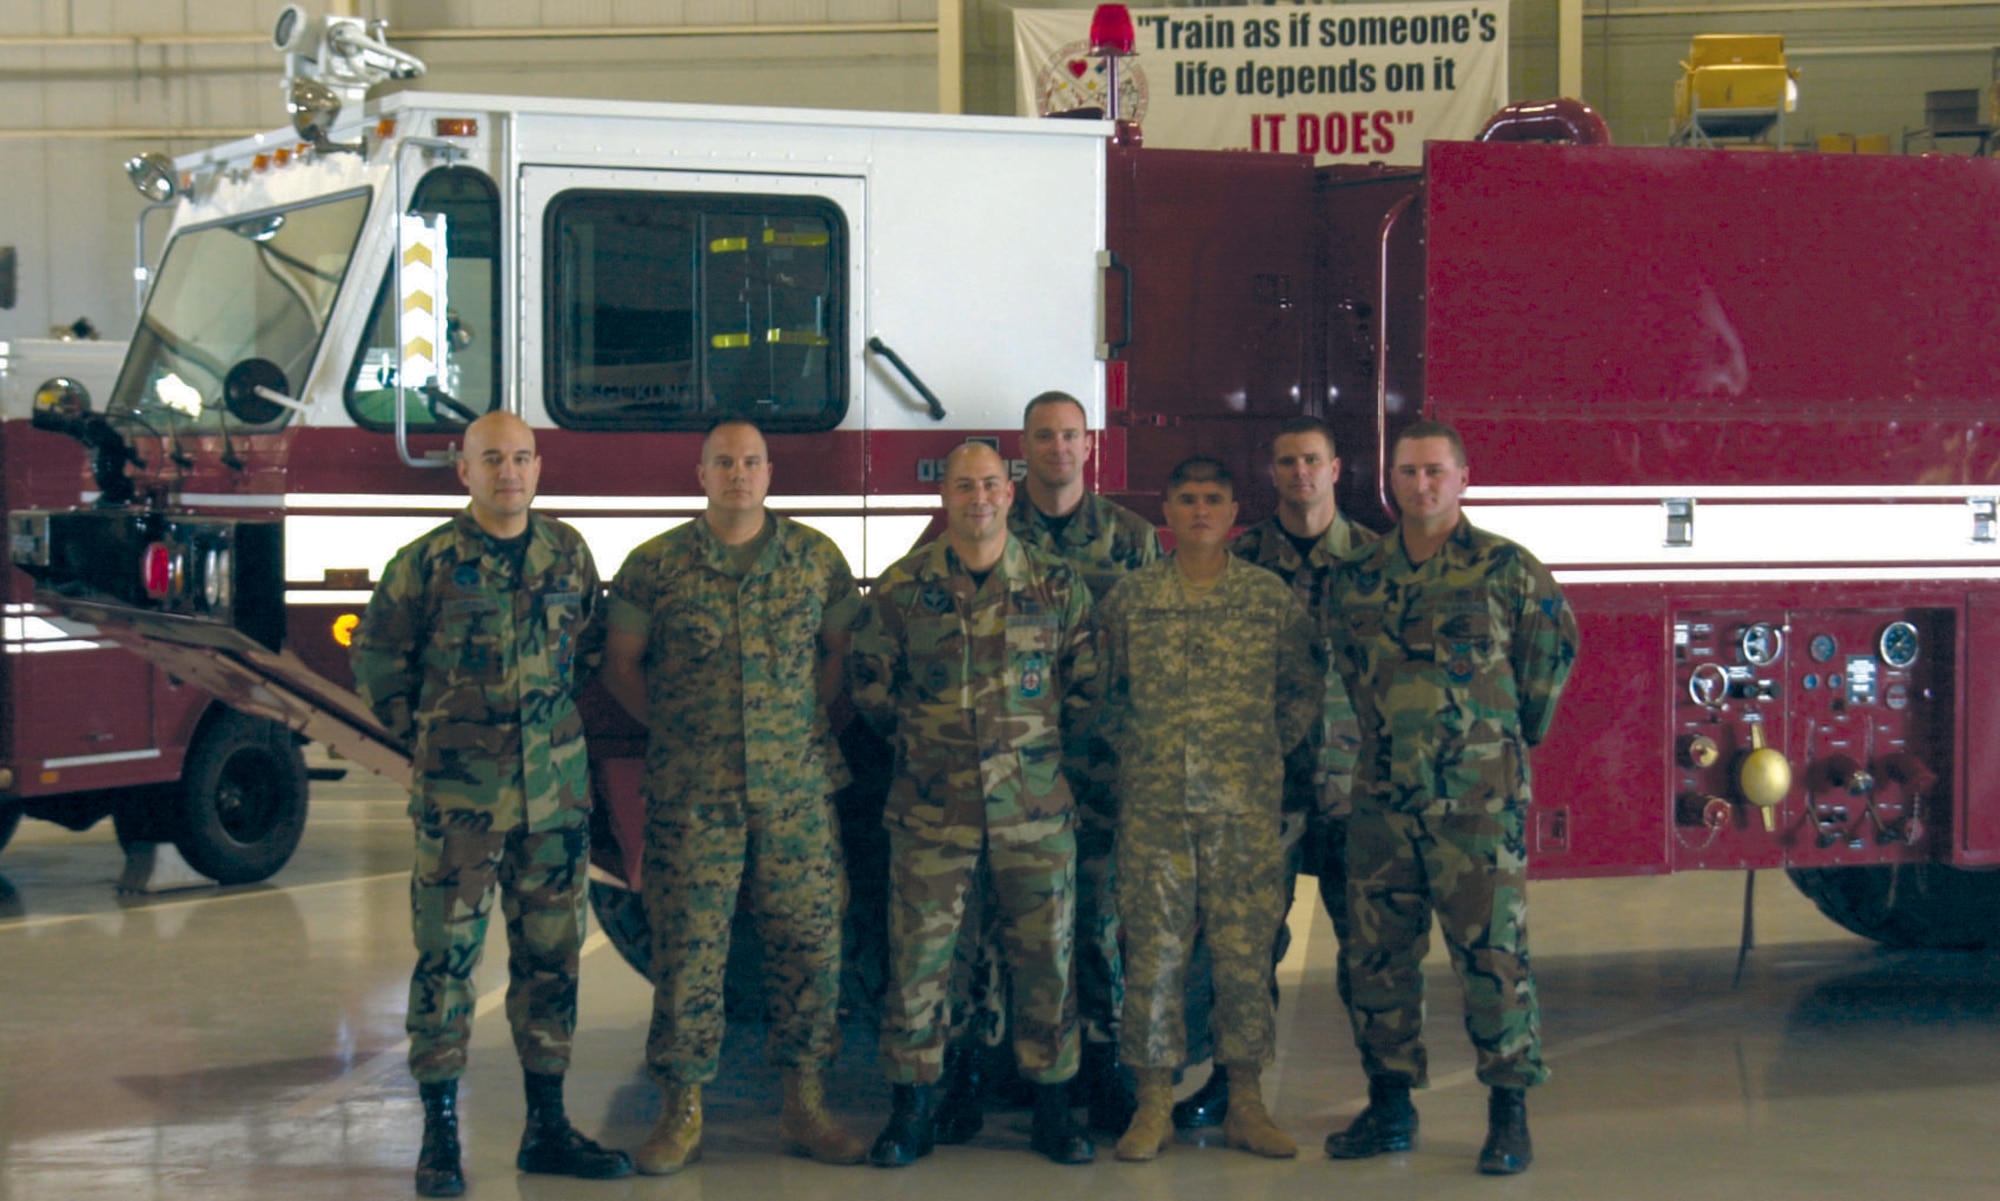 Members of Goodfellow’s Military Support for Civilian Authorities team pose in front of one of their fire trucks Wednesday at the Louis F. Garland Department of Defense Fire Academy. From left to right are Master Sgt. Al Medina, Marine Sgt. Taylor Leathers, Staff Sgt. Matt Hare, Staff Sgt. Scott Anderson, Army Staff Sgt. Luis Ruesga, Staff Sgt. Travis Winningham and Staff Sgt. Jason Cunningham, all of the 312th Training Squadron. Not pictured are Staff Sgt. Eric Kunz (the primary driver of the truck) and Navy Petty Officer 2nd Class Victor Torres. (U.S. Air Force photo by Airman 1st Class Stephen Musal)